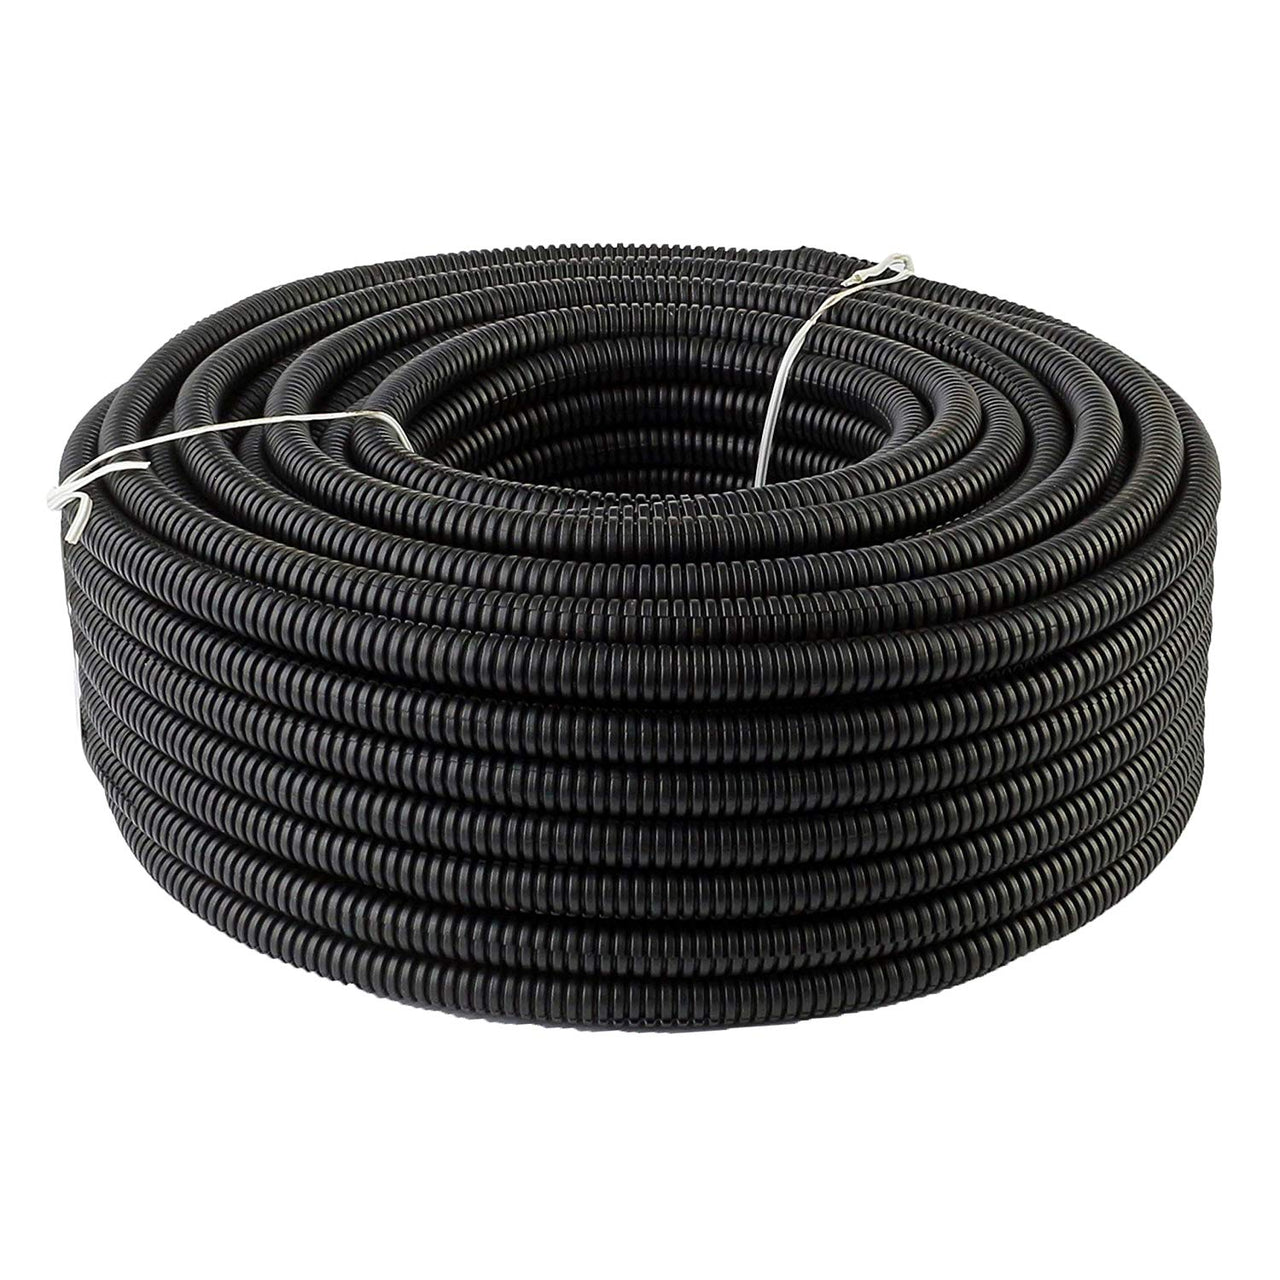 Absolute SLT14 20' 1/4" split loom wire tubing hose cover auto home marine + 3M Temflex 1700 electrical tape